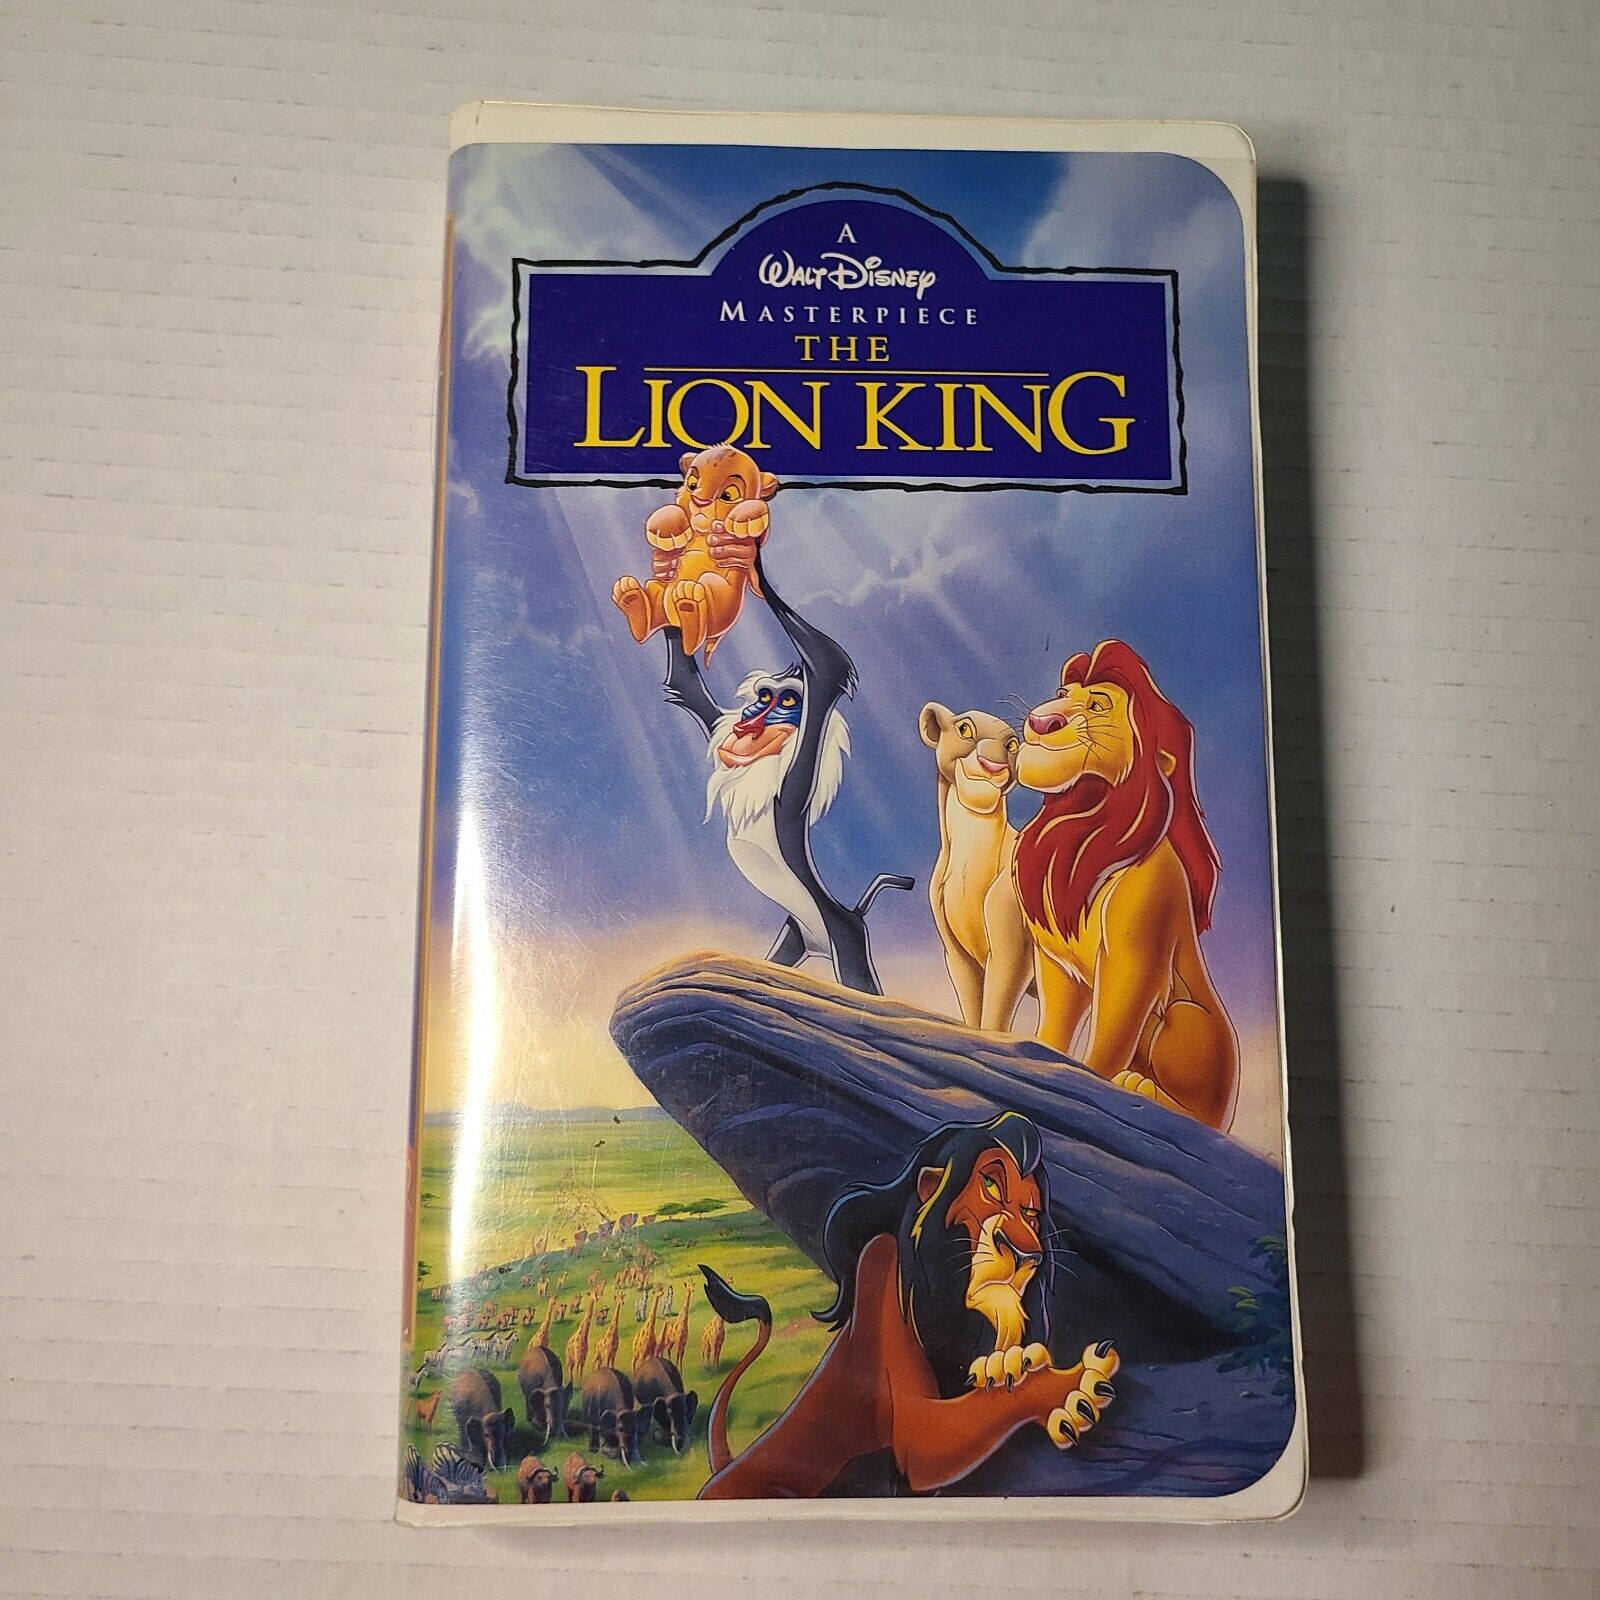 Disney's The Lion King (VHS, 1995) Masterpiece Collection 